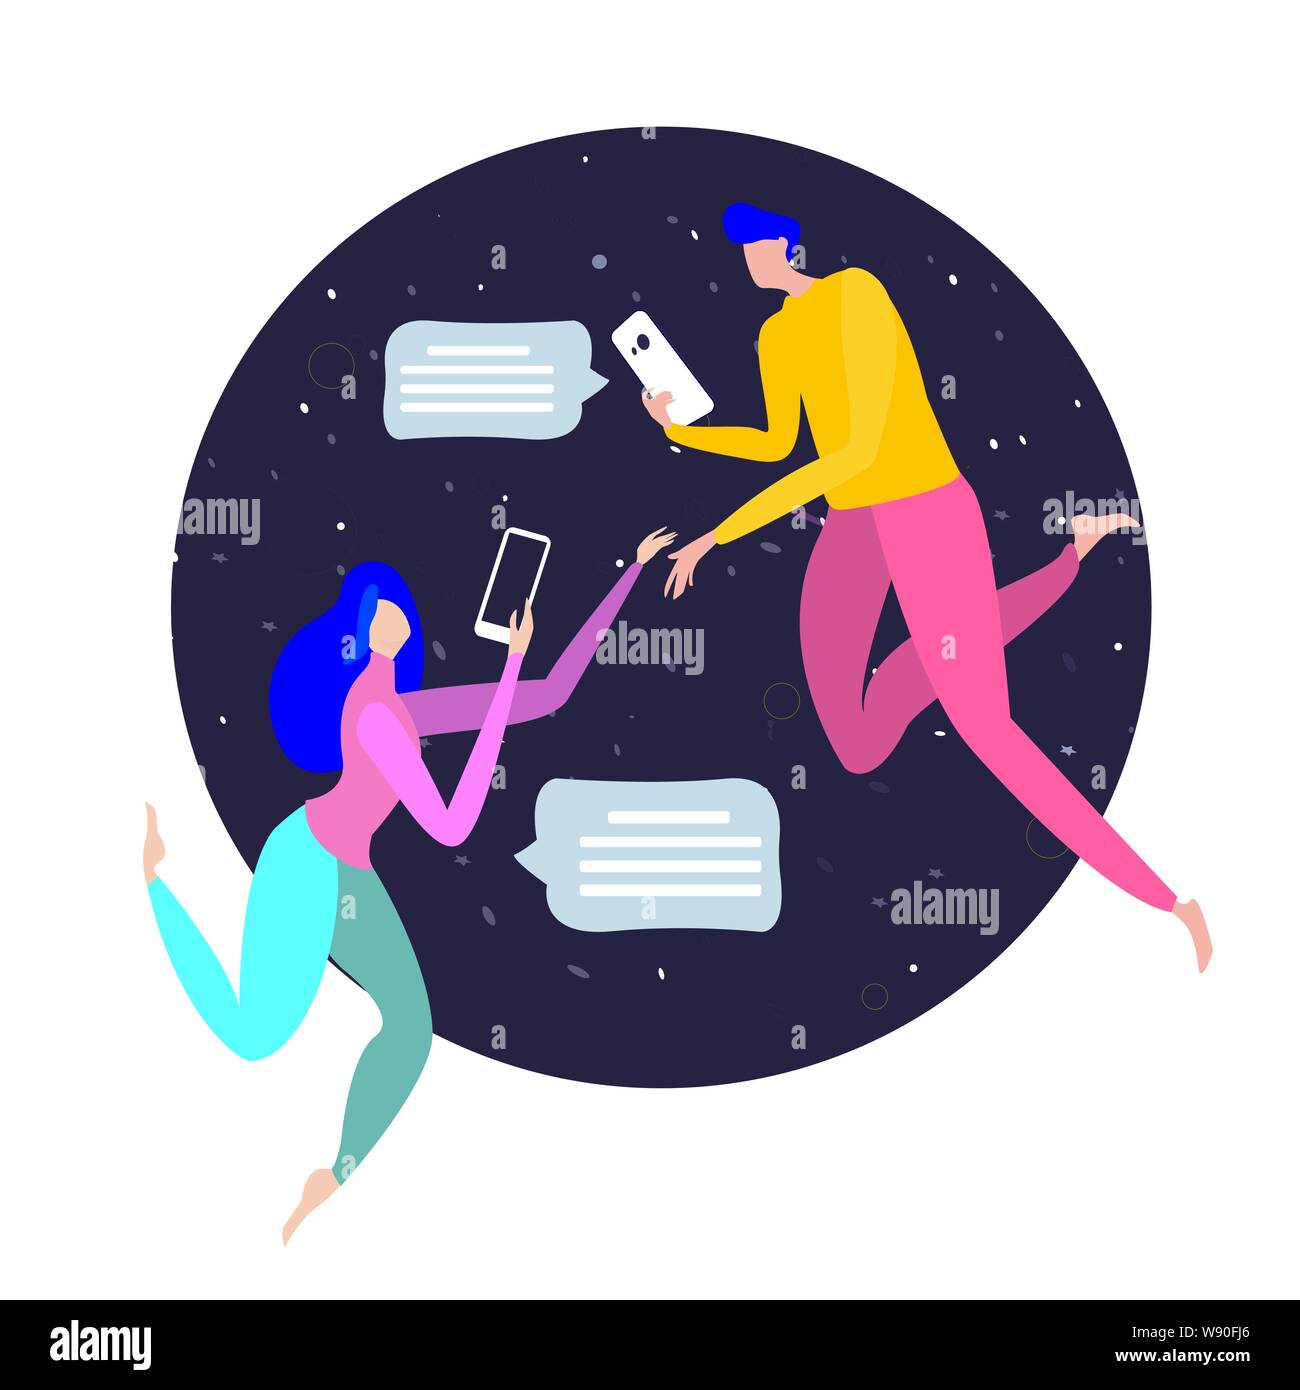 Virtual relationship and love dialog. Communication between people through network on the smartphone. Flat vector illustration Stock Vector